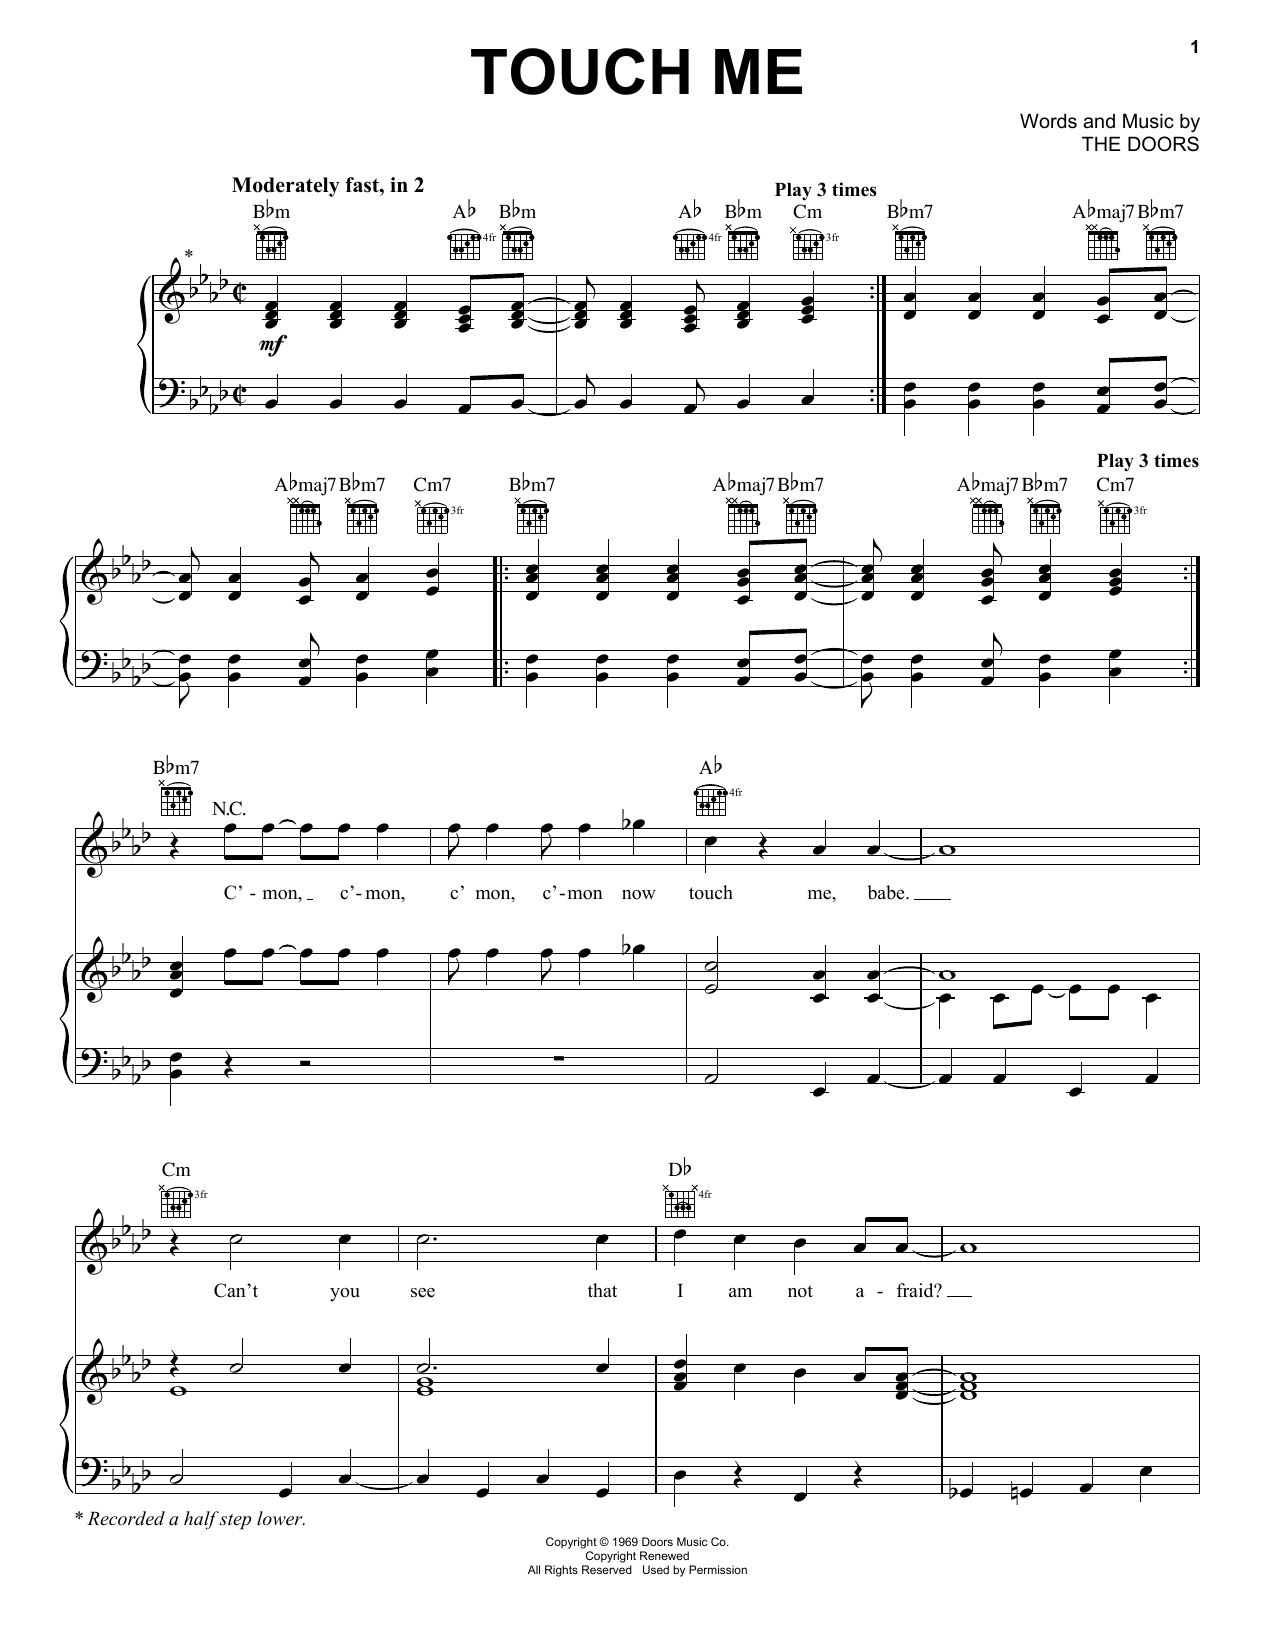 Download The Doors Touch Me Sheet Music